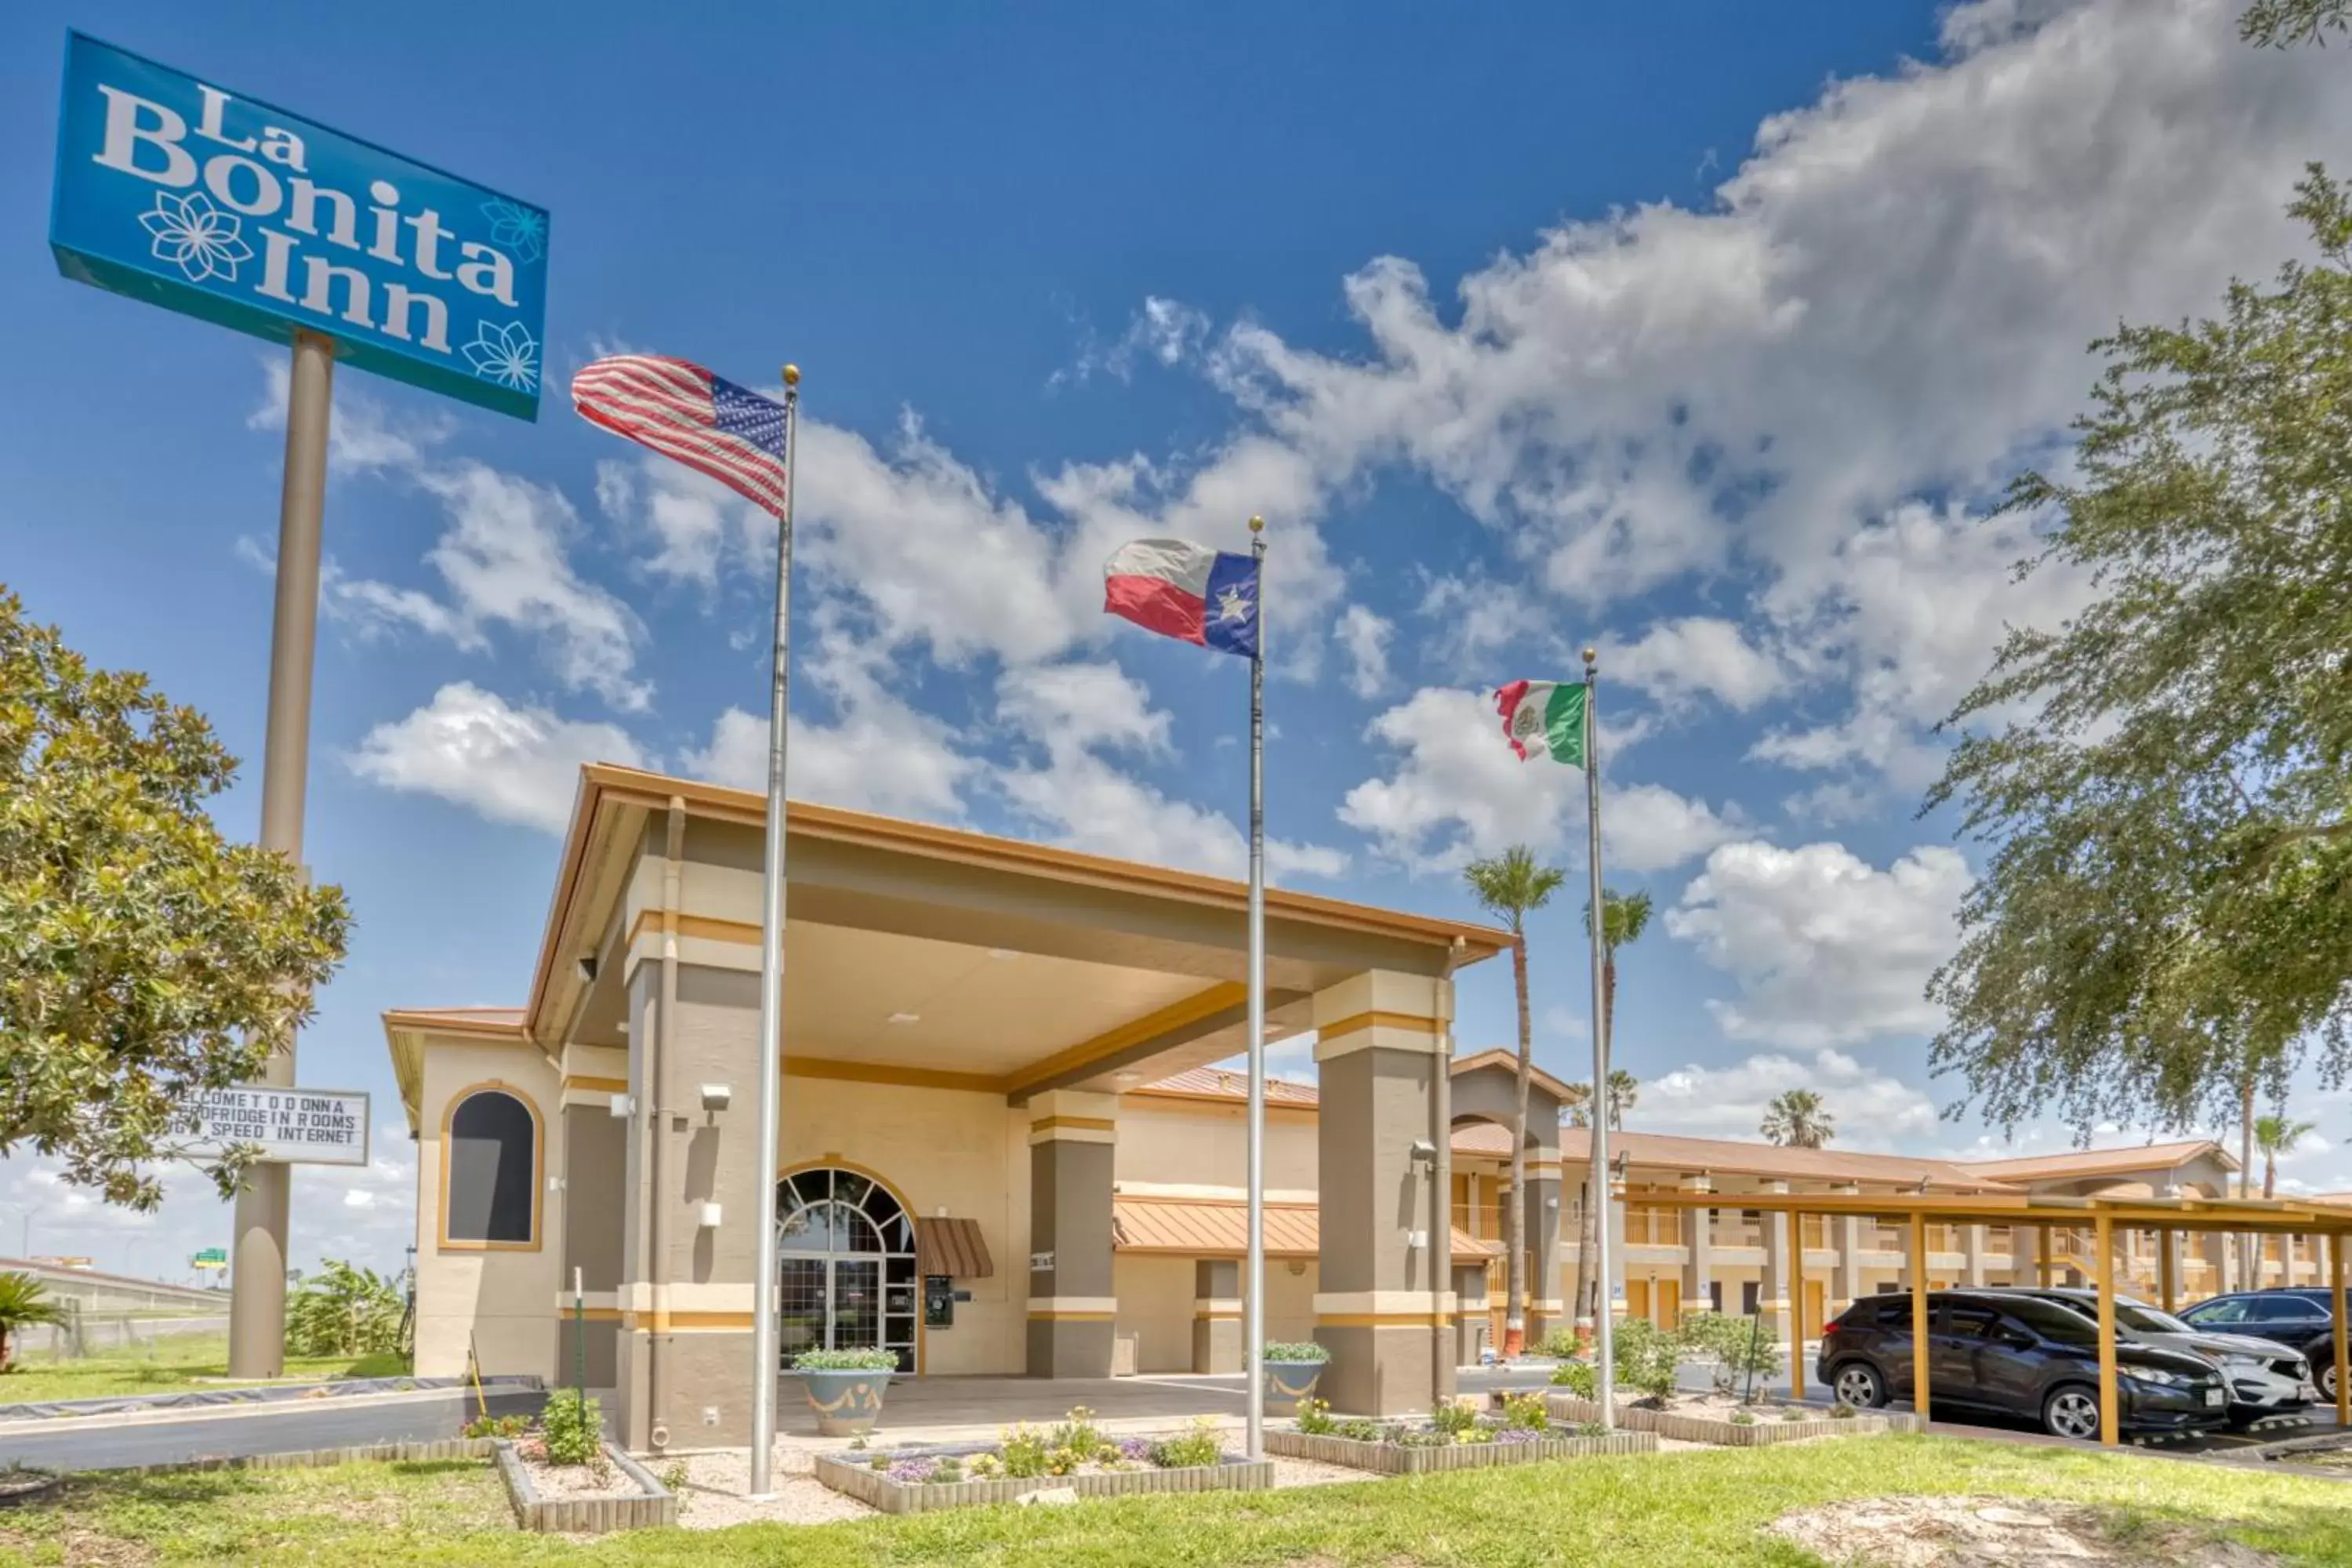 Property building in Texas Inn Donna